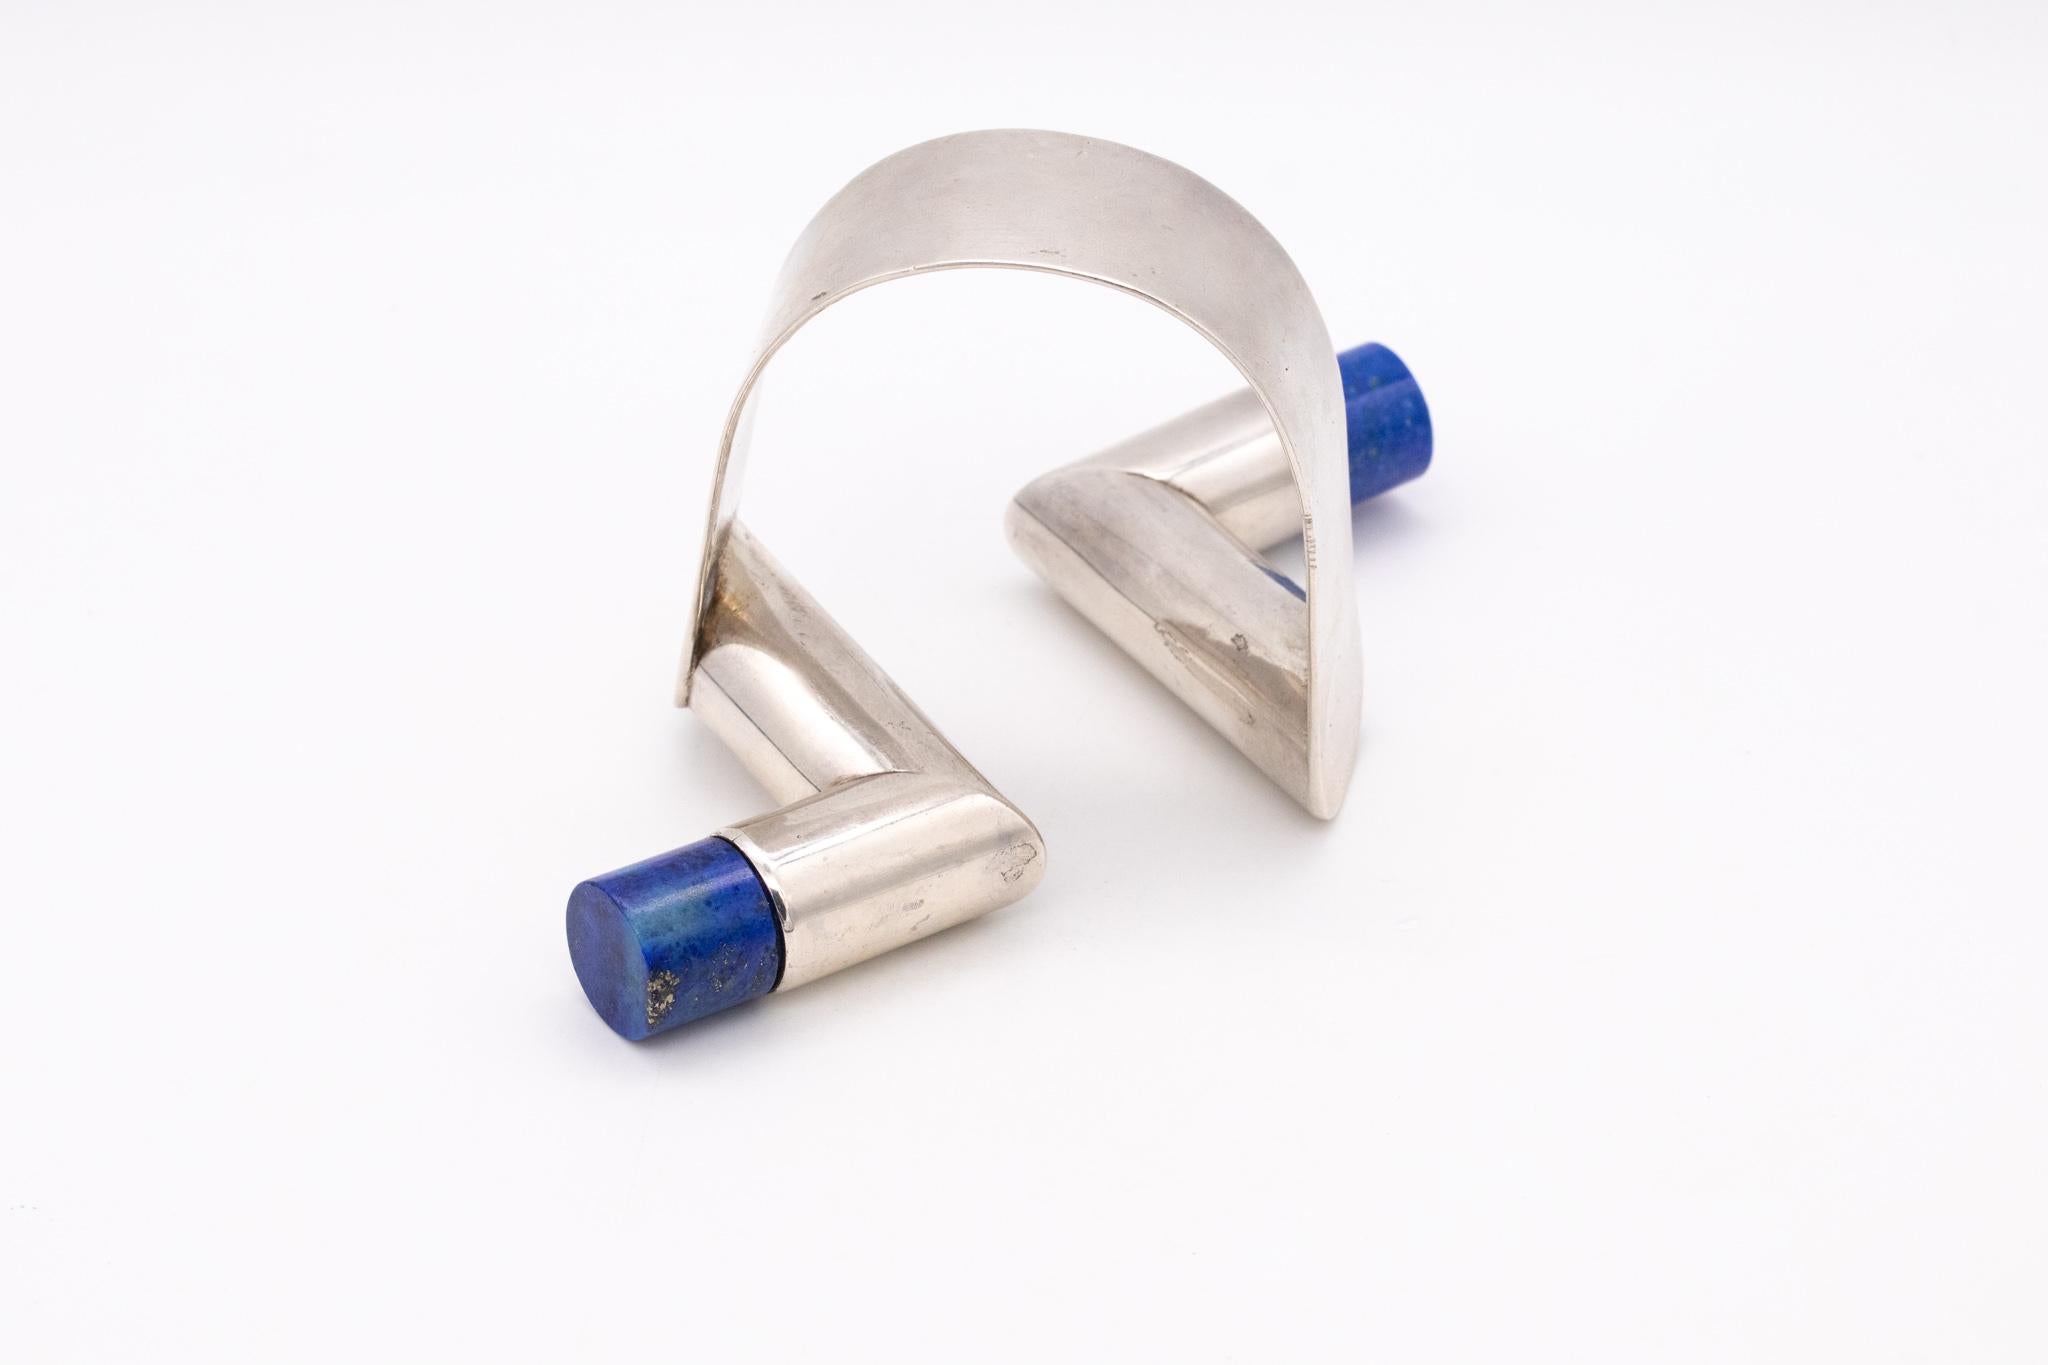 Mixed Cut Italy Milano 1980 Memphis Geometric Bracelet In .925 Silver And Lapis Lazuli For Sale